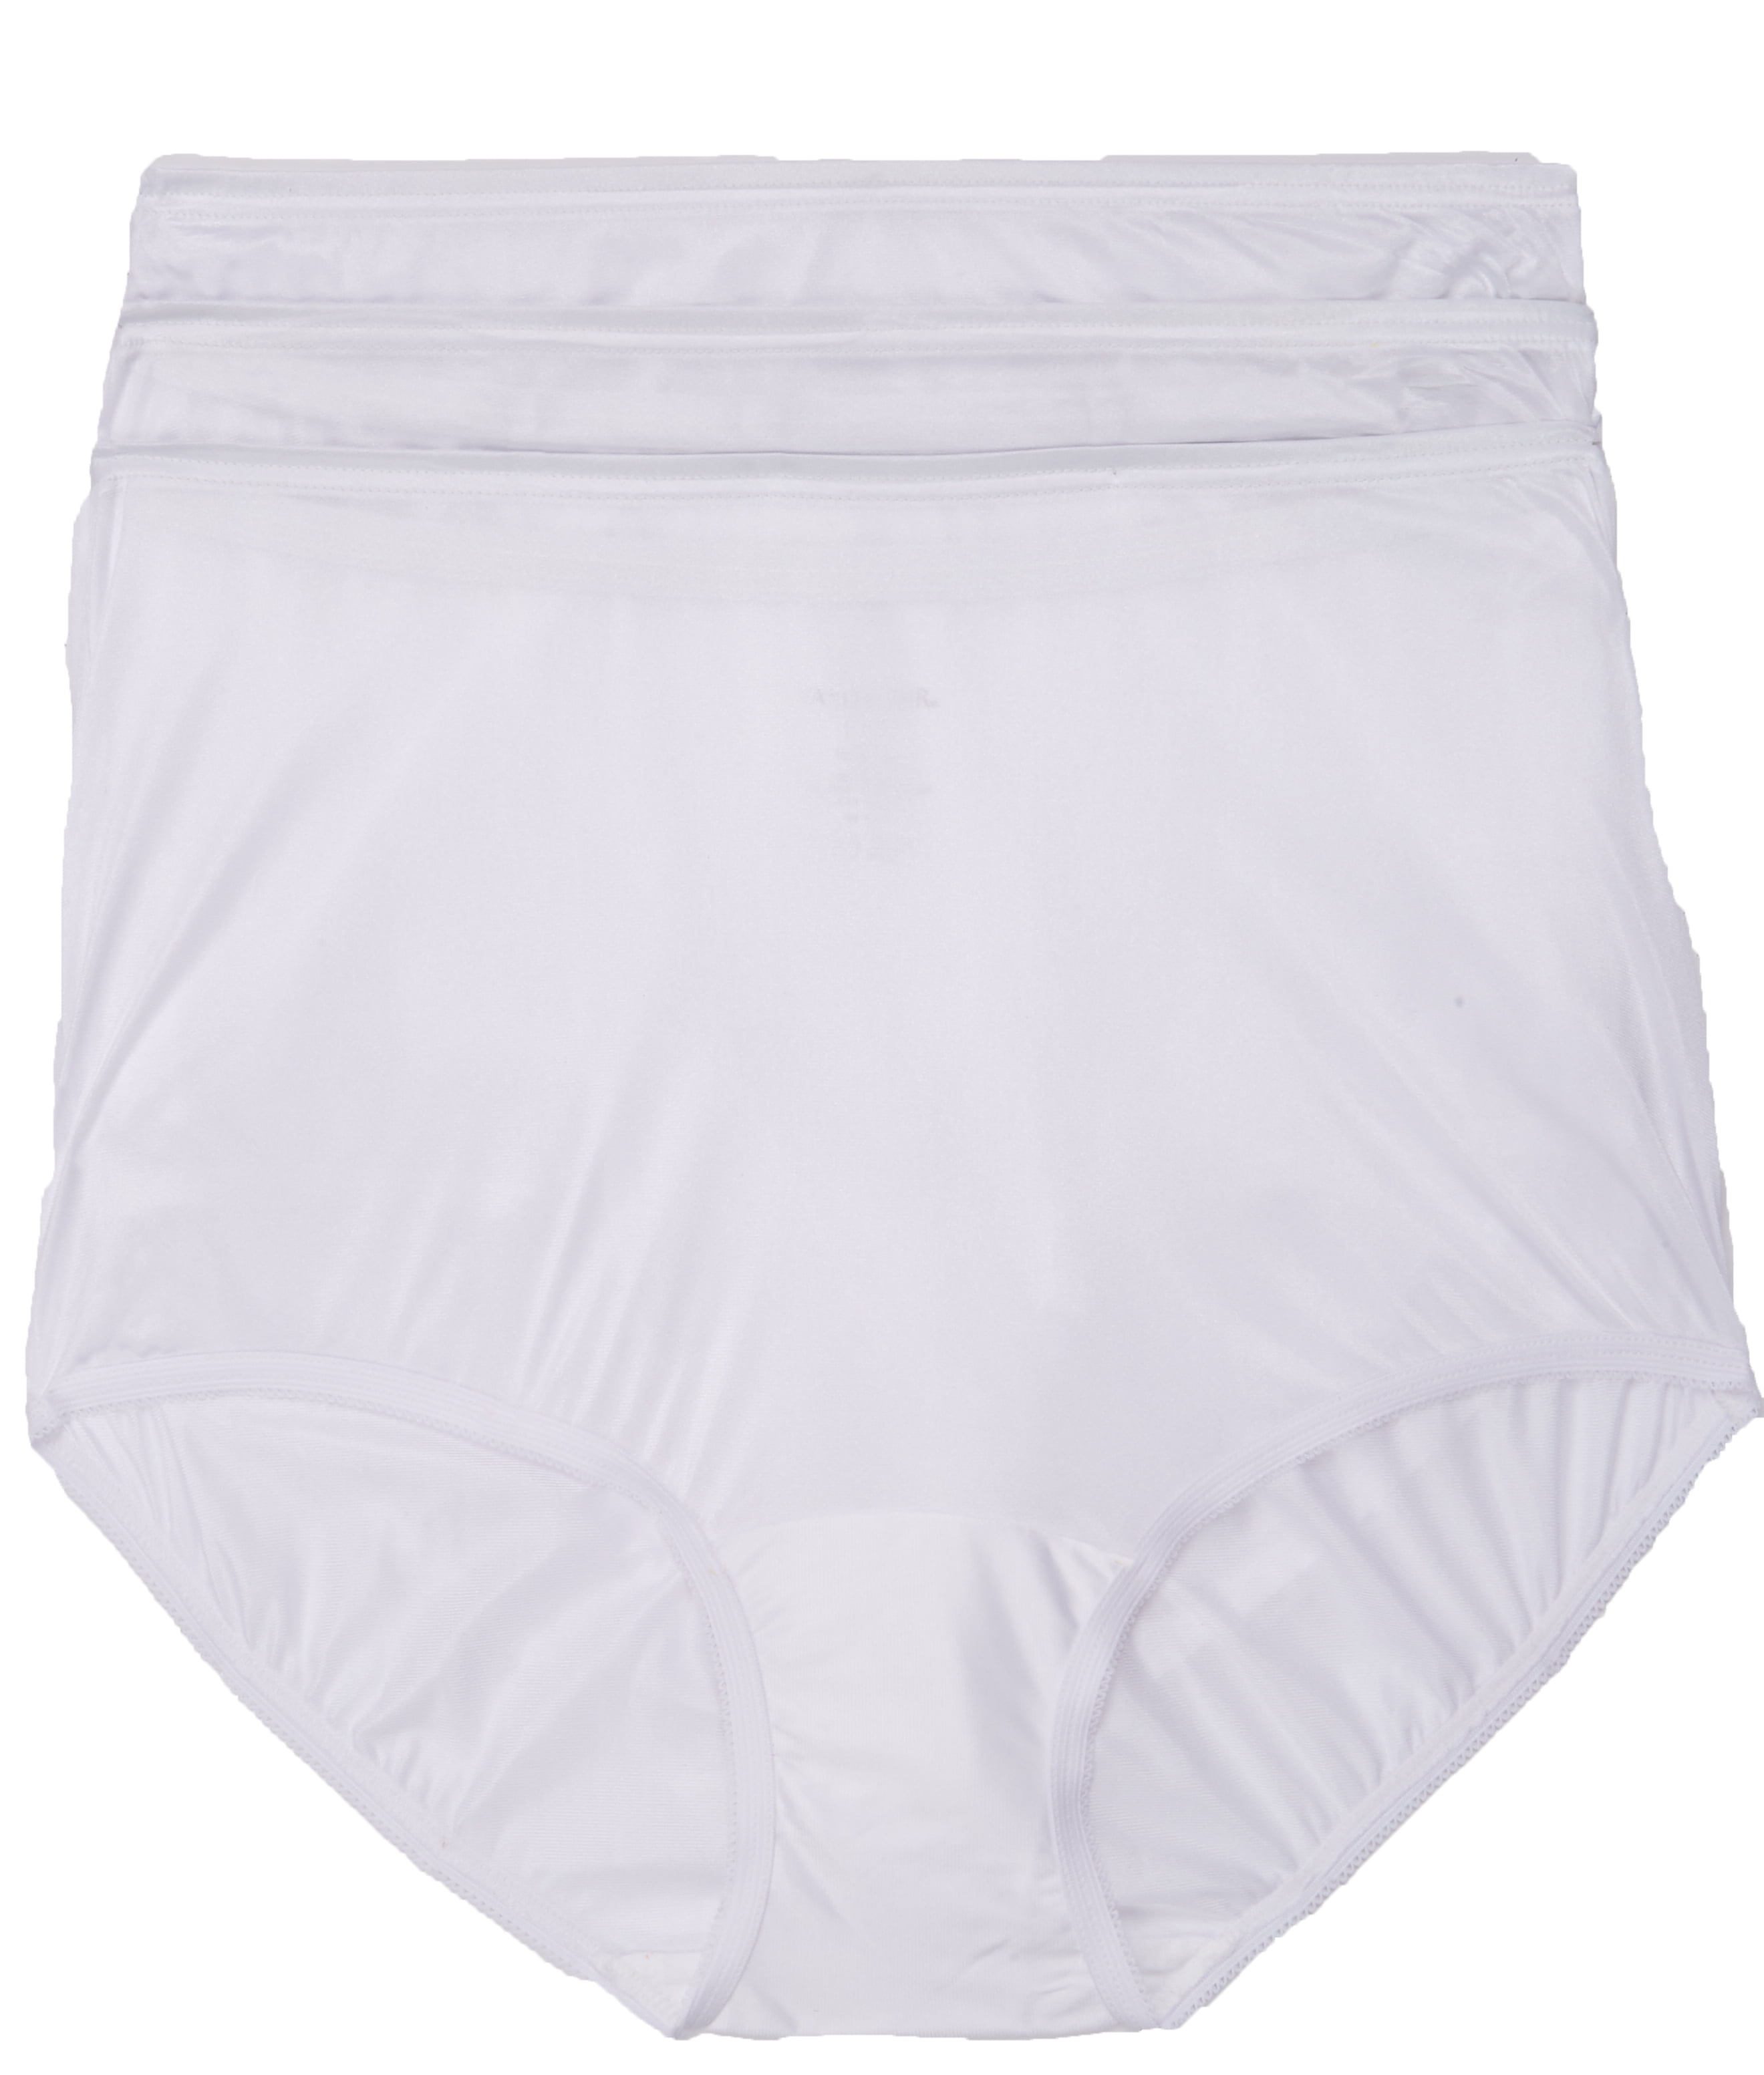 Vanity Fair Womens Underwear Perfectly Yours India